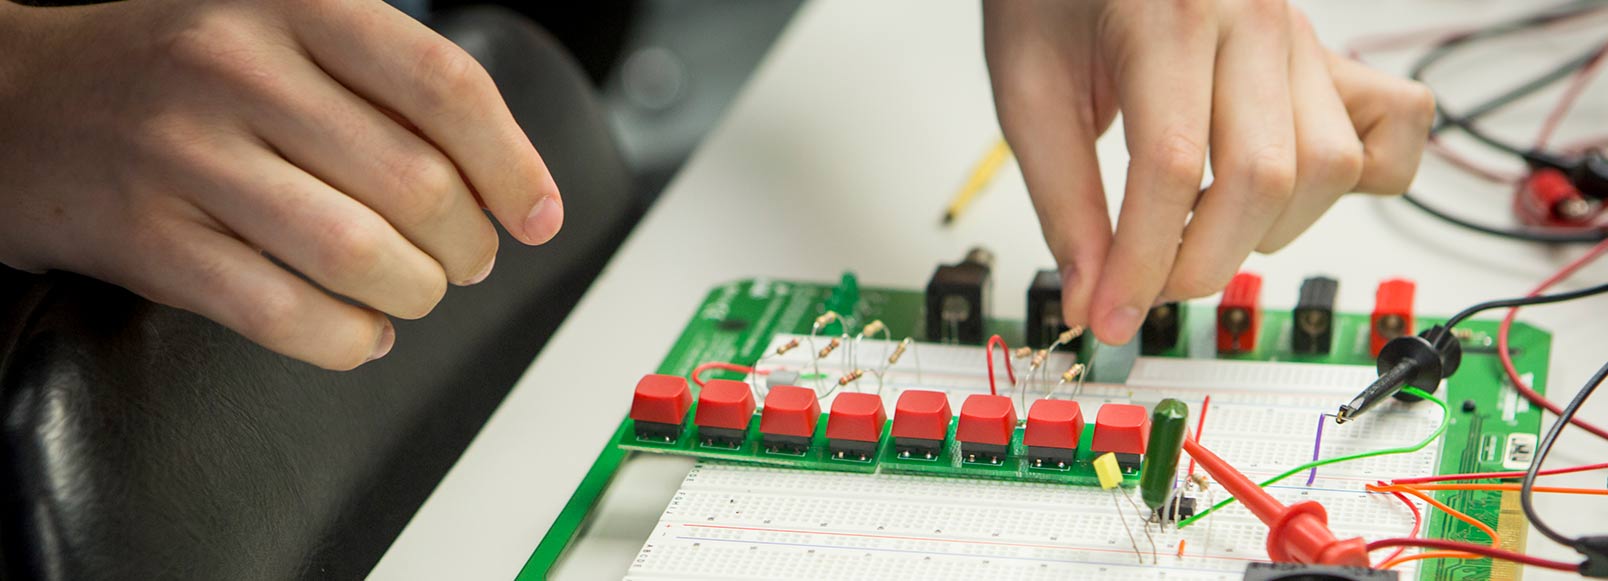 Close up of student's hands working on circuit board